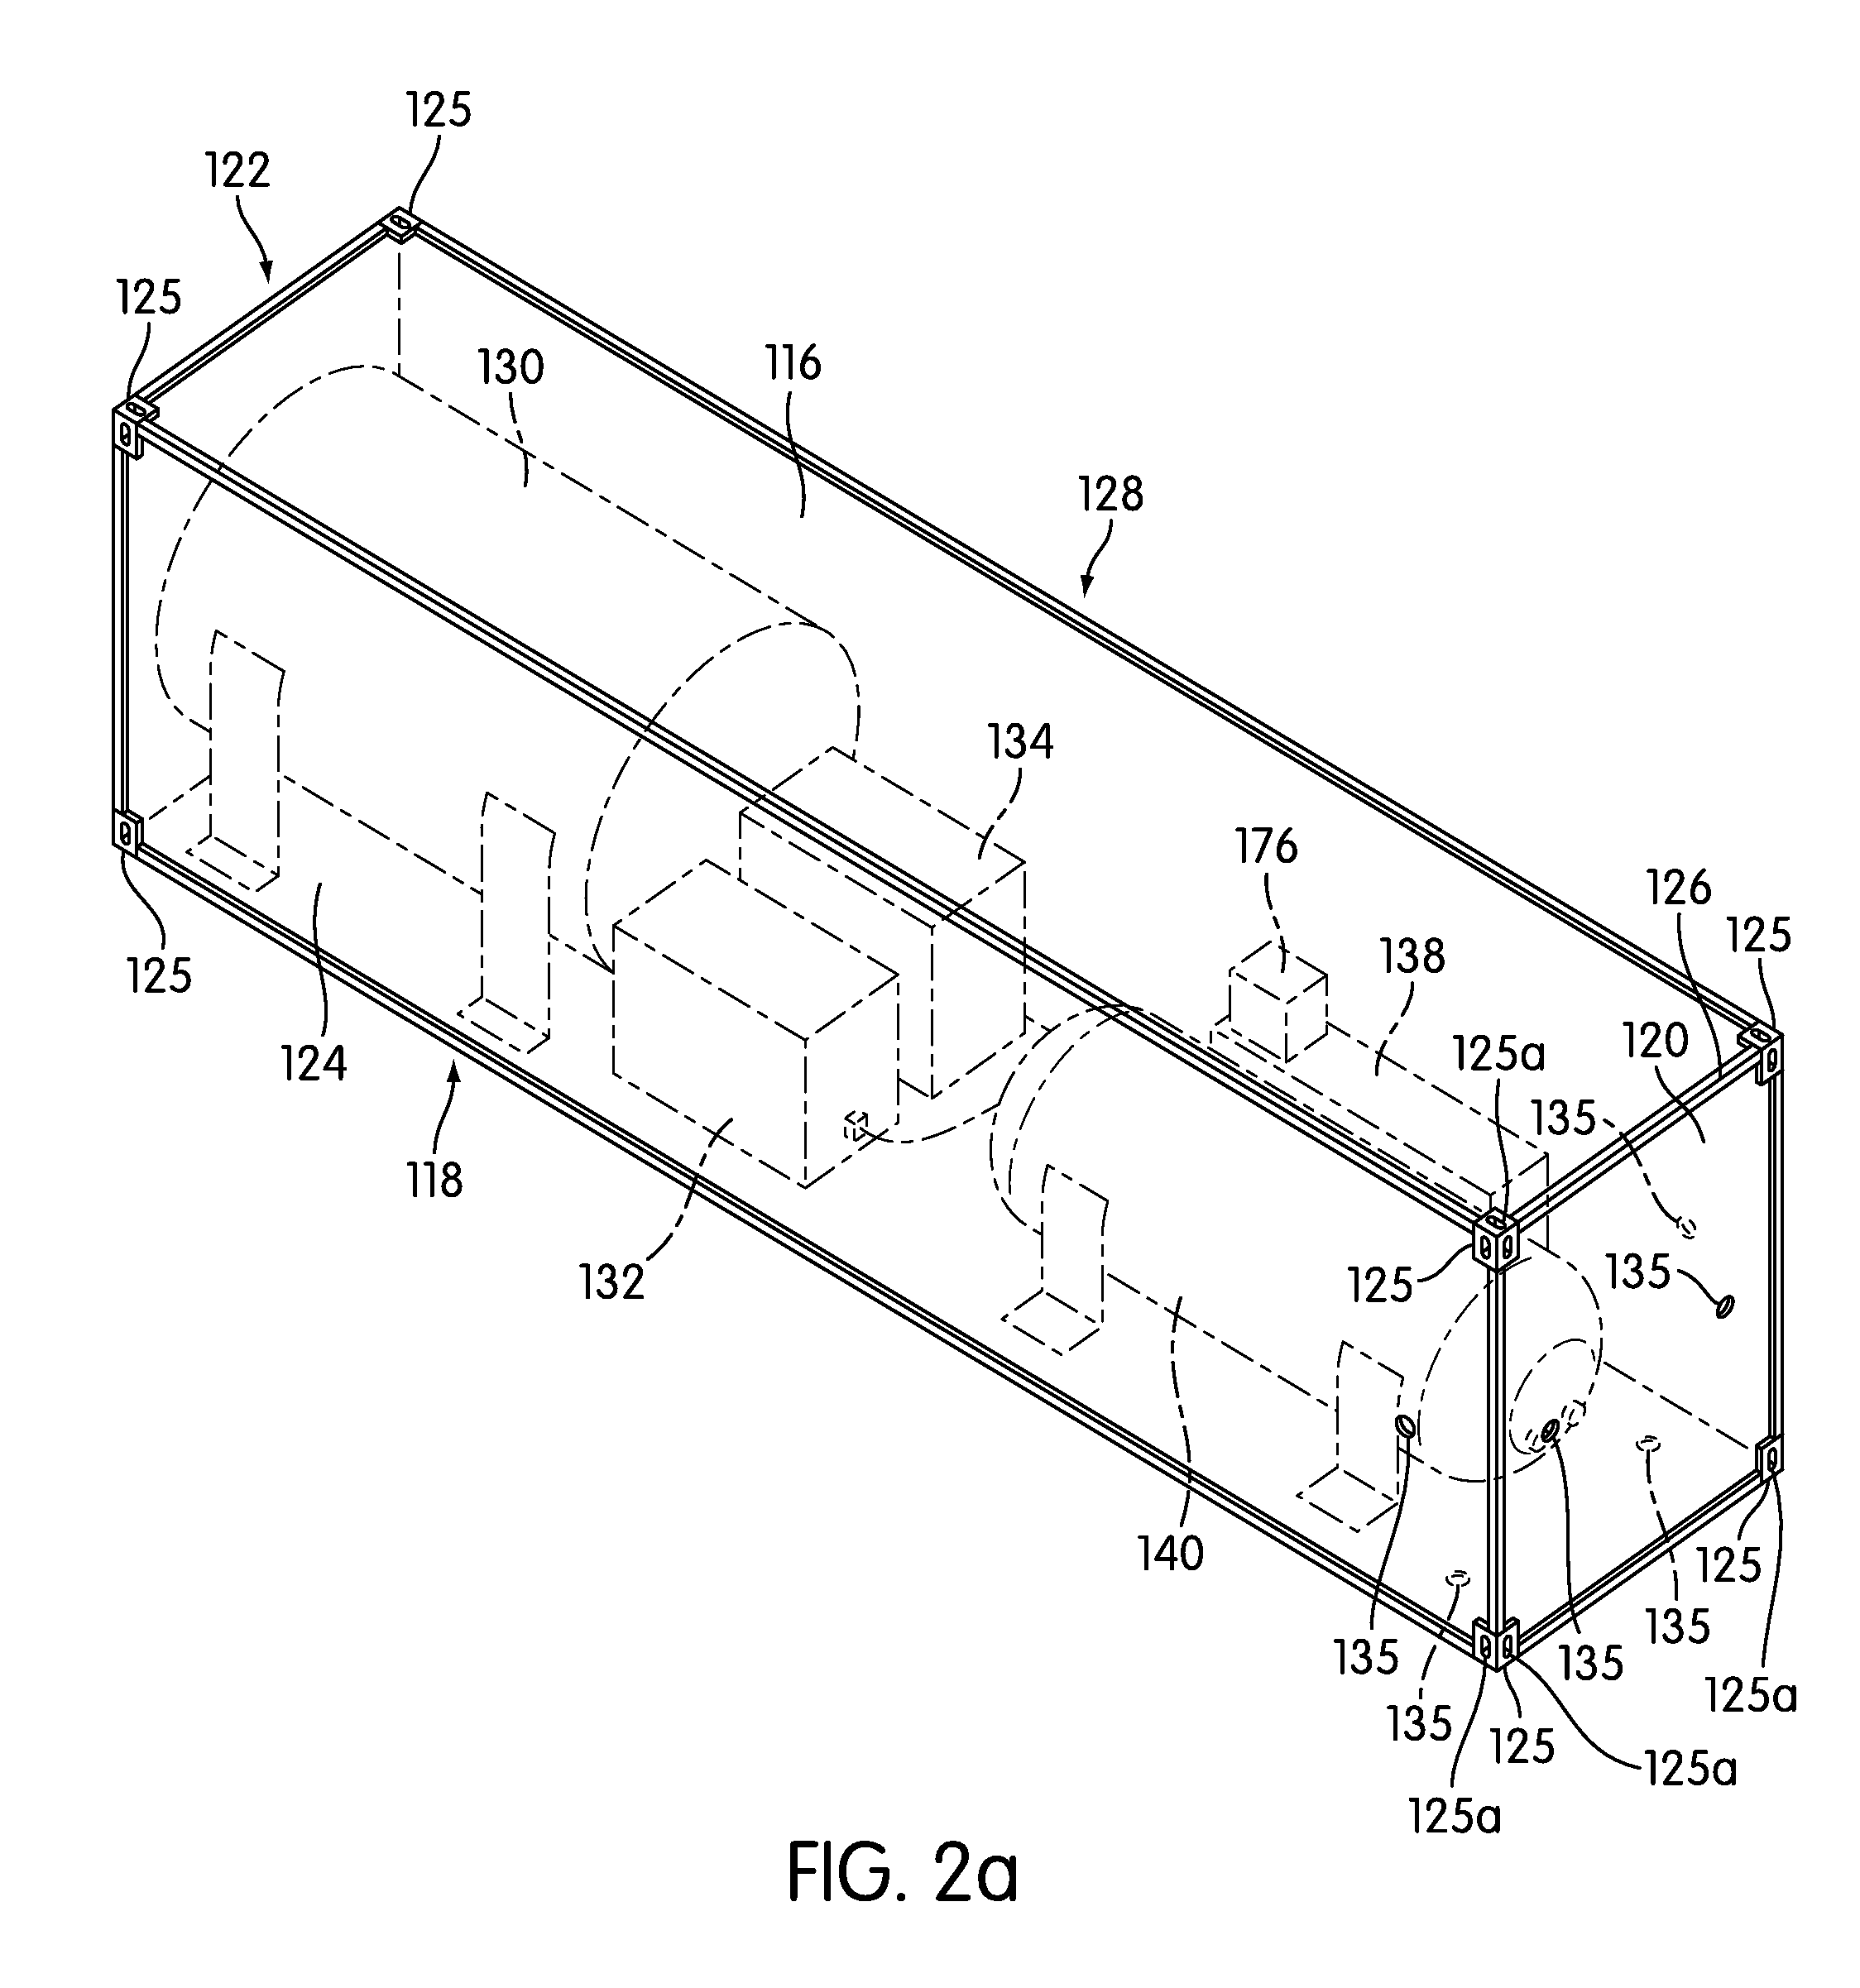 Rail lubrication and/or friction modification system within a non-freight carrying intermodal container